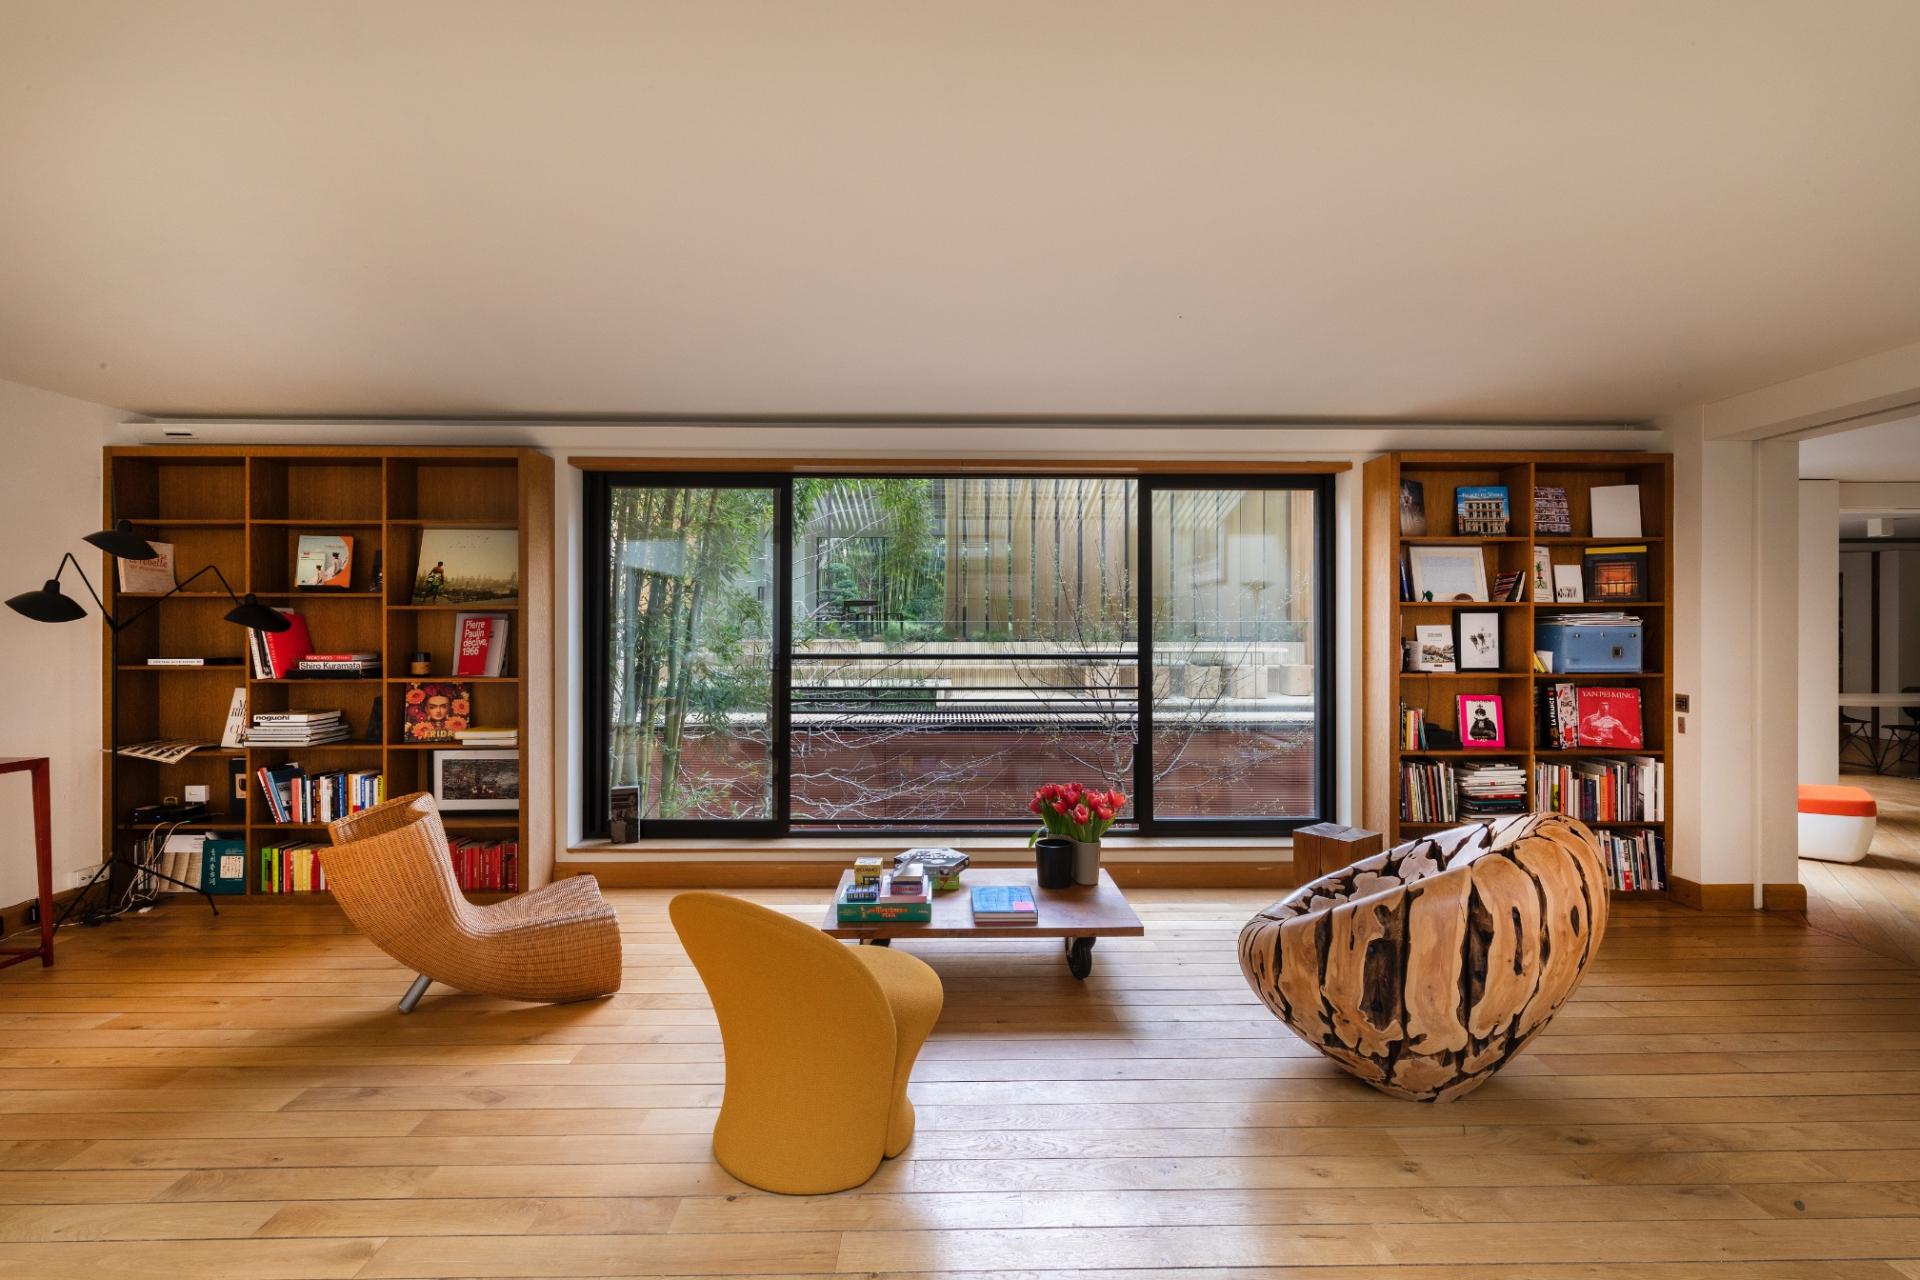 Japanese design legend Kenzo Takada’s 13,778 sq. ft. Parisian home is up for sale